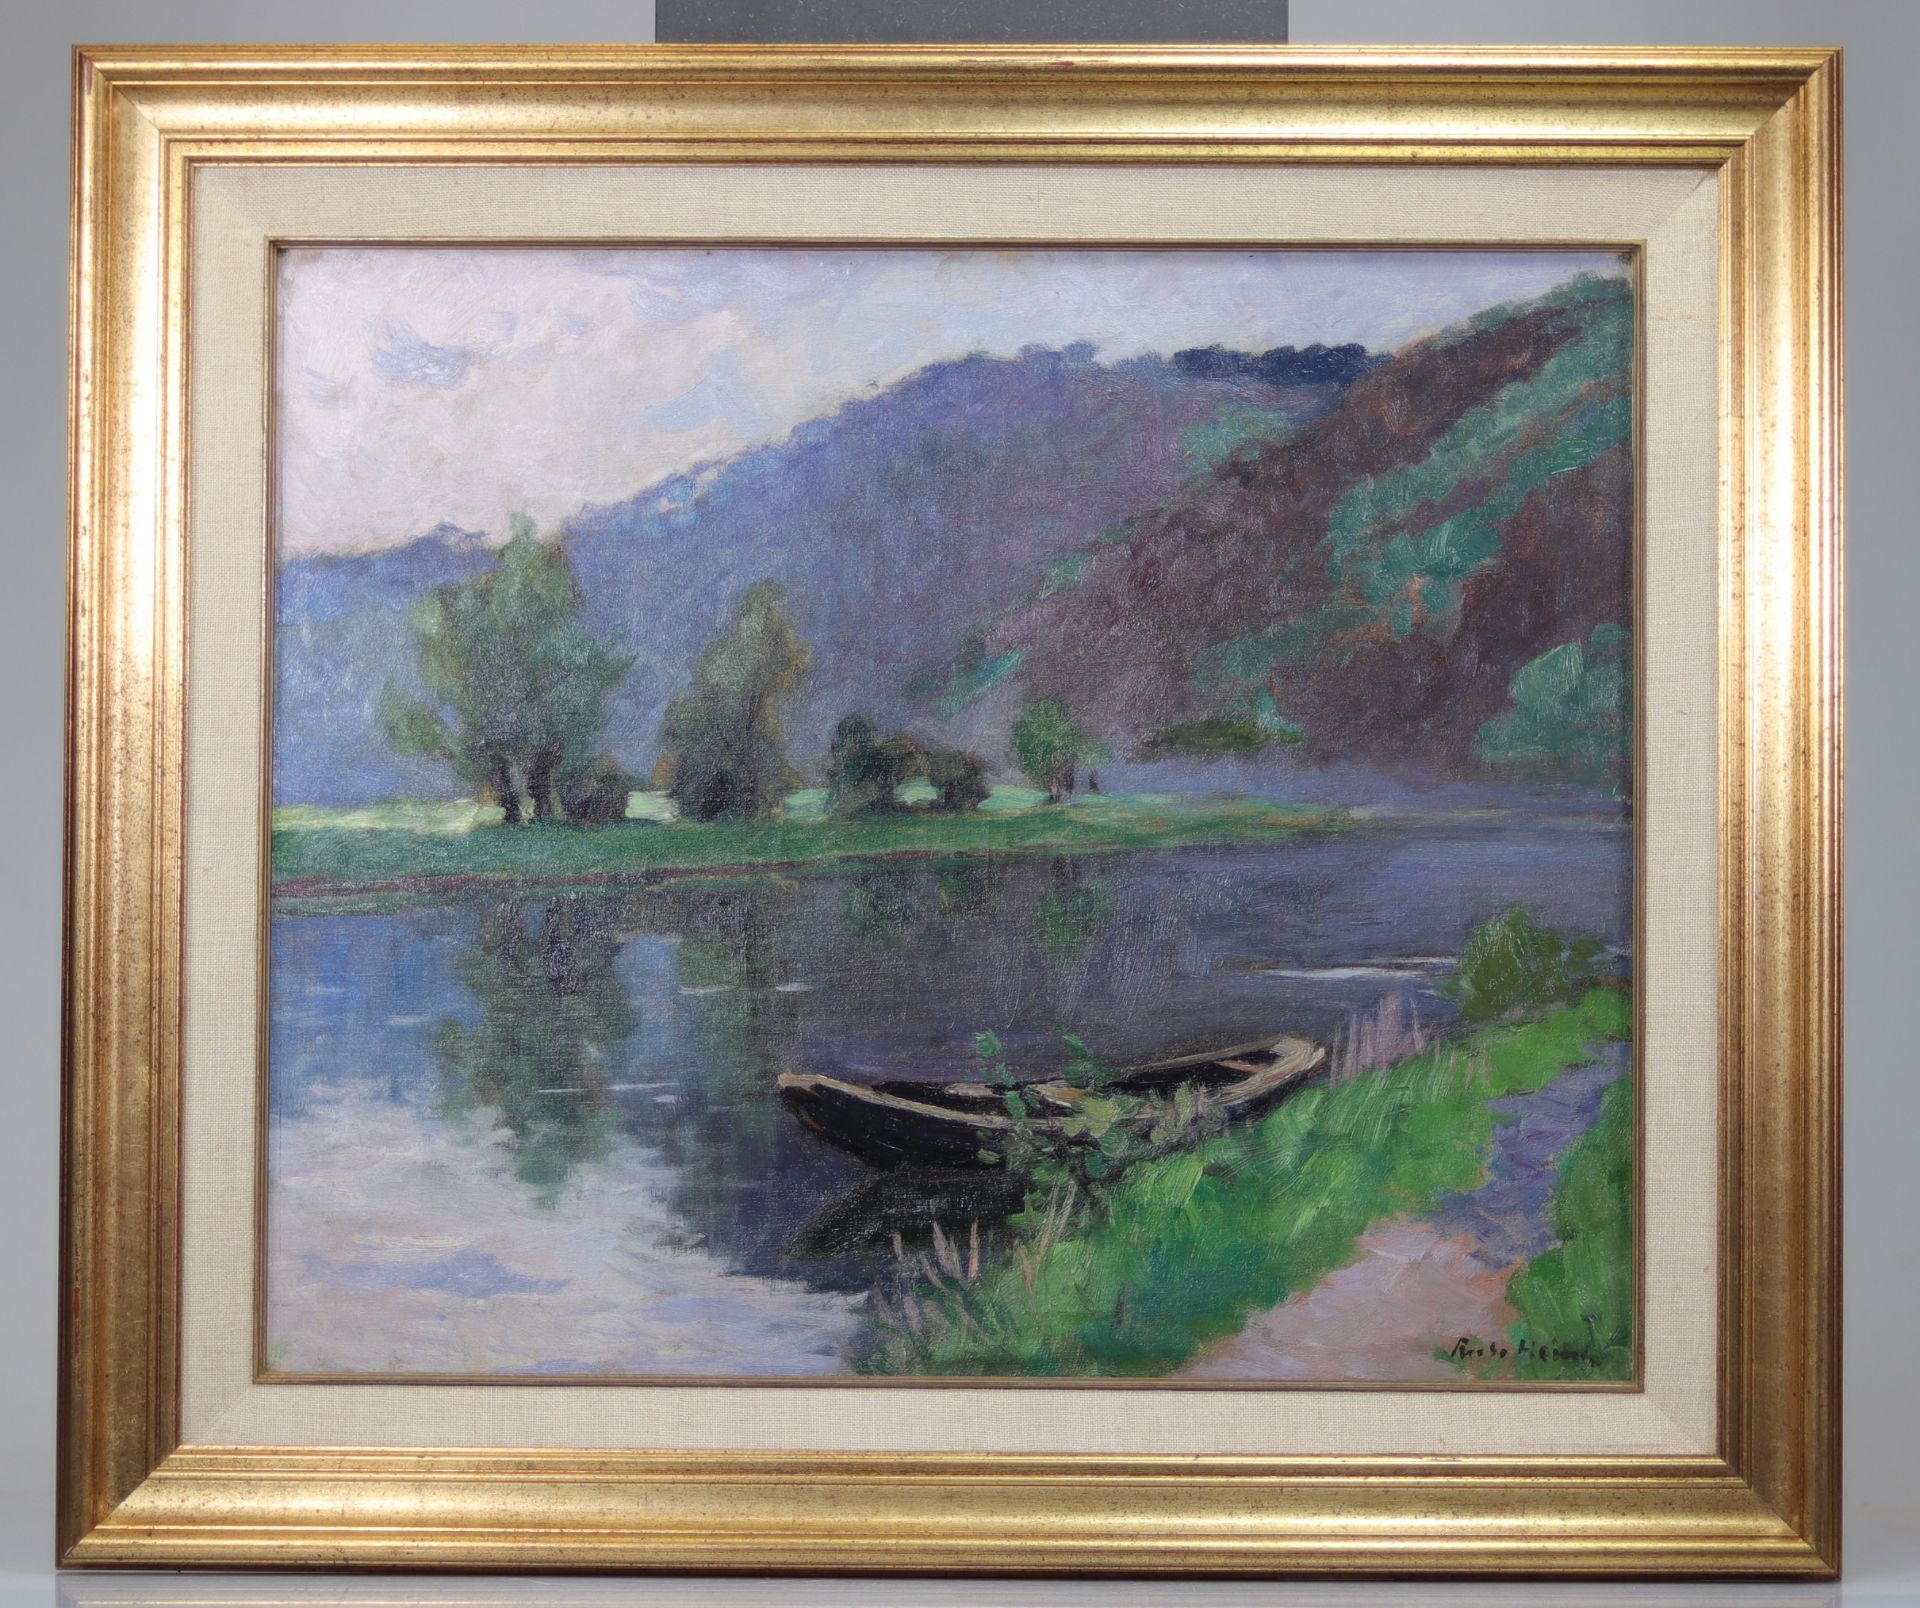 Richard HEINTZ (1871-1929) Oil on canvas "boat at the water's edge" - Image 2 of 2